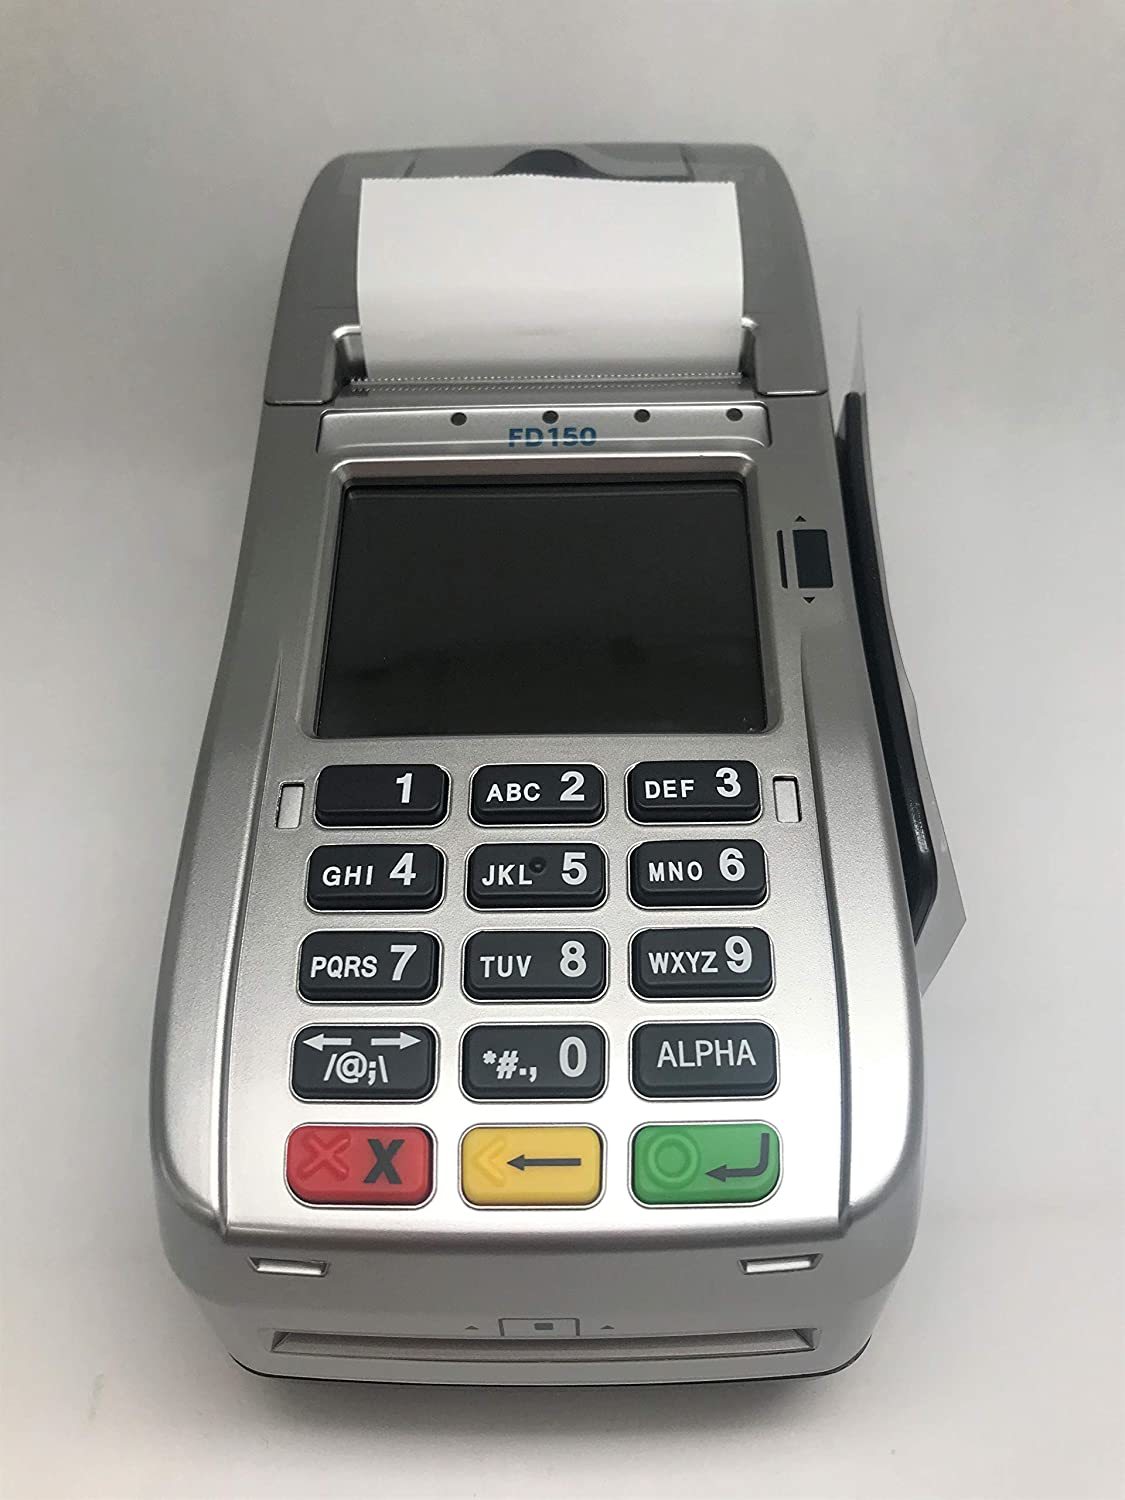 Primary image for First Data FD150 EMV CTLS Credit Card Terminal with Wells 350 Encryption